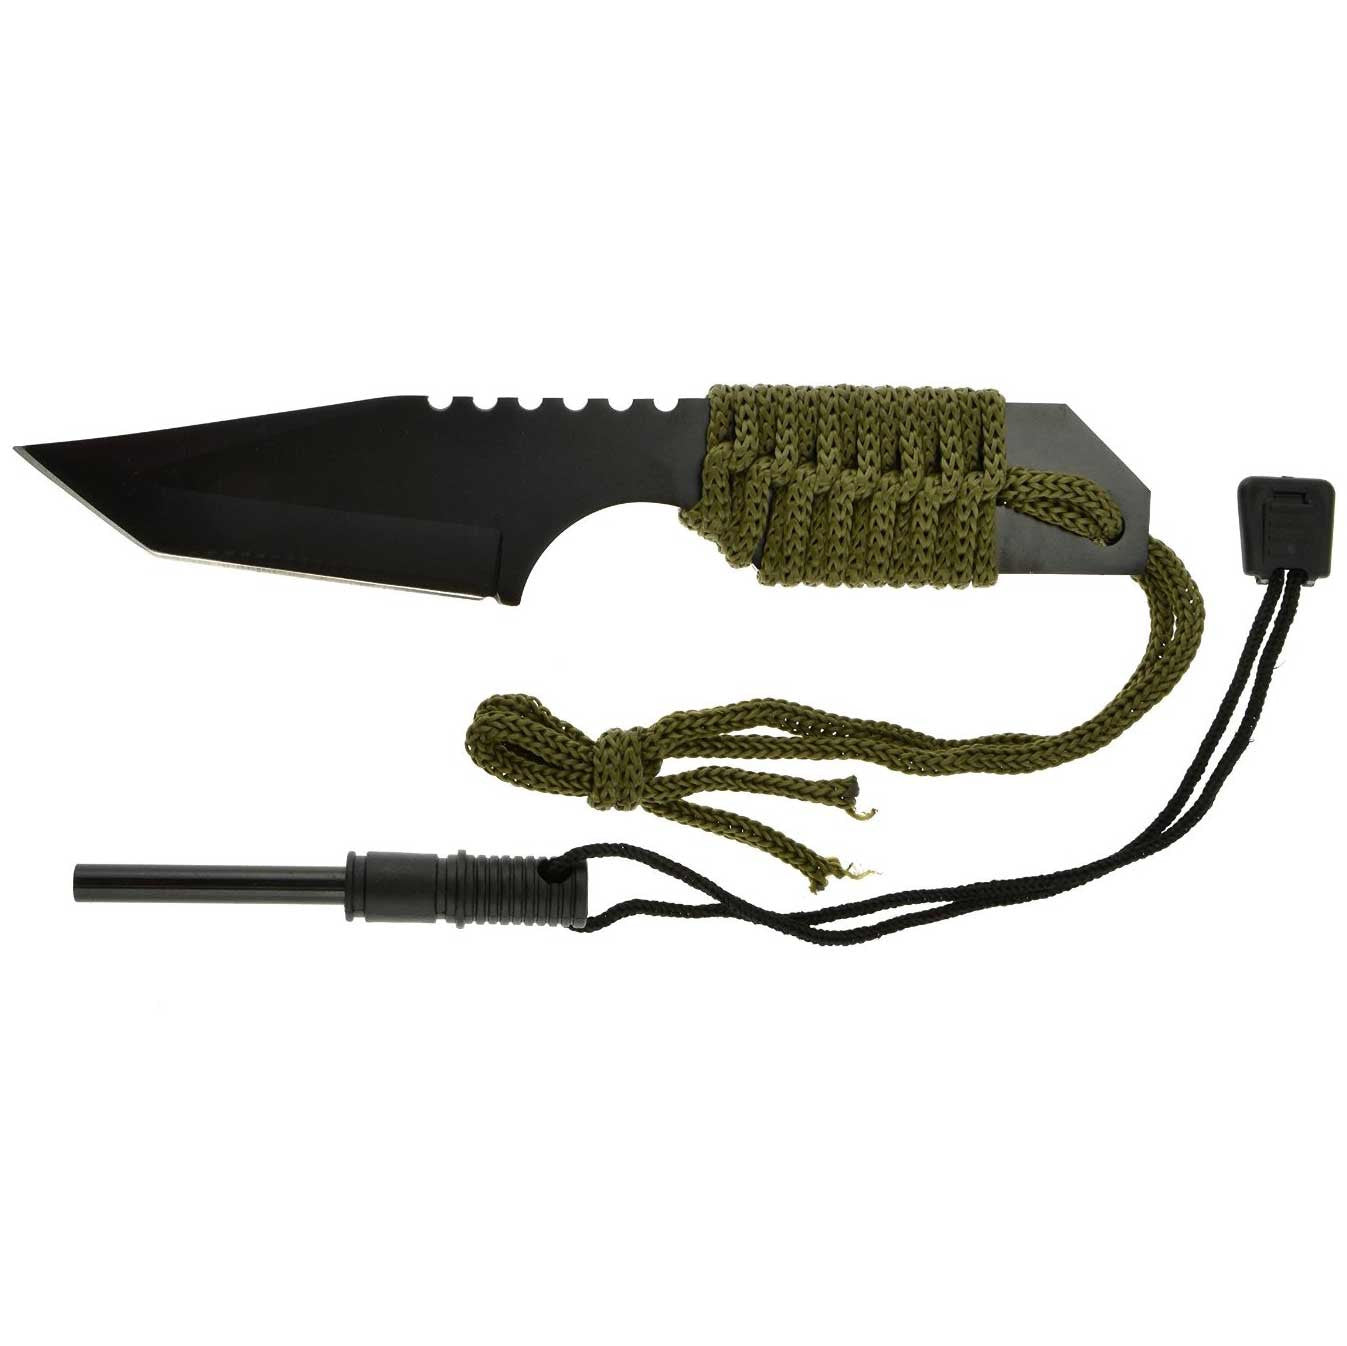 Tactical Knife With Fire Starter - OddGifts.com